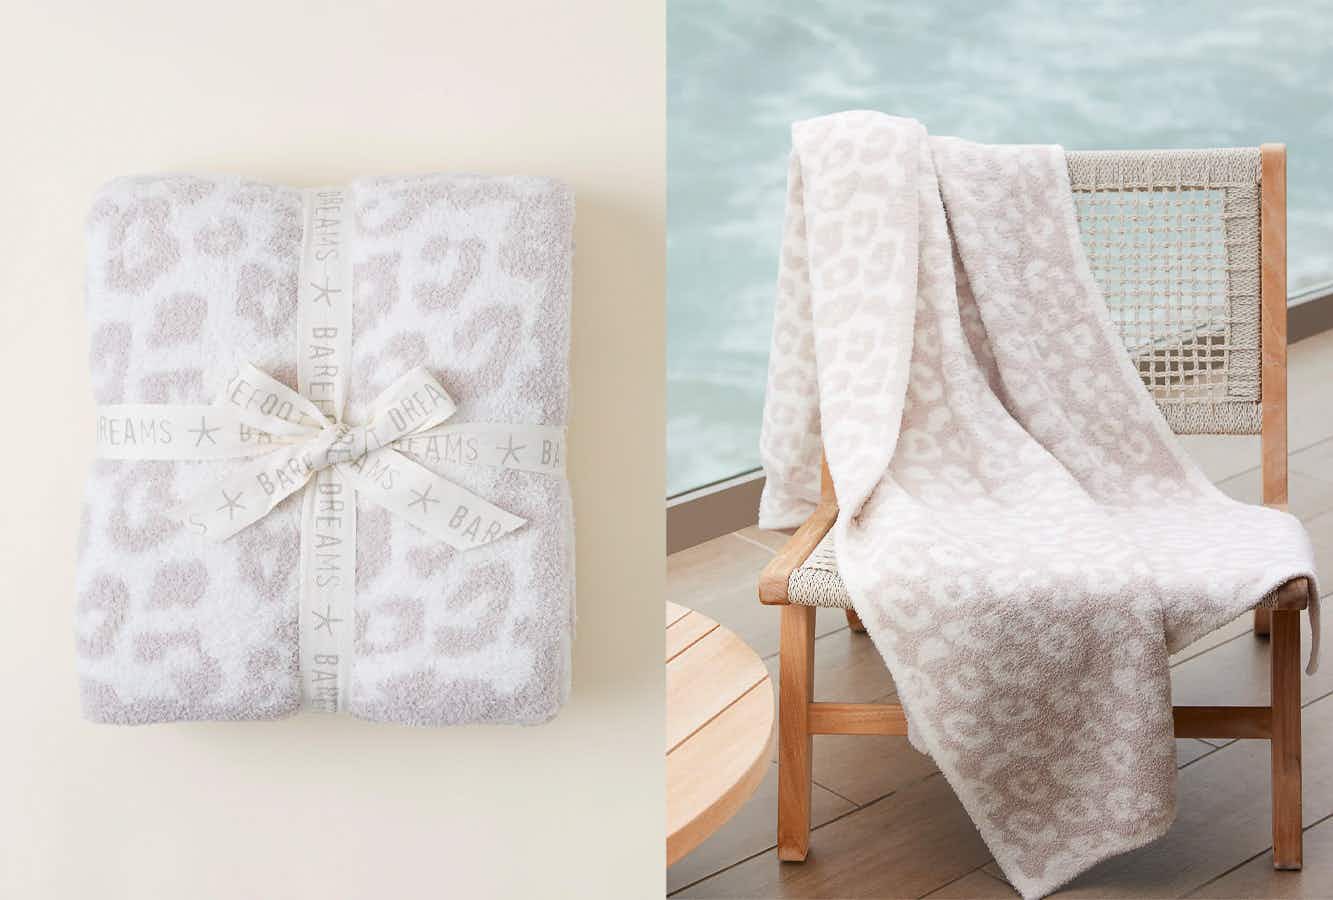 A folded Barefoot Dreams blanket next to one on a chair